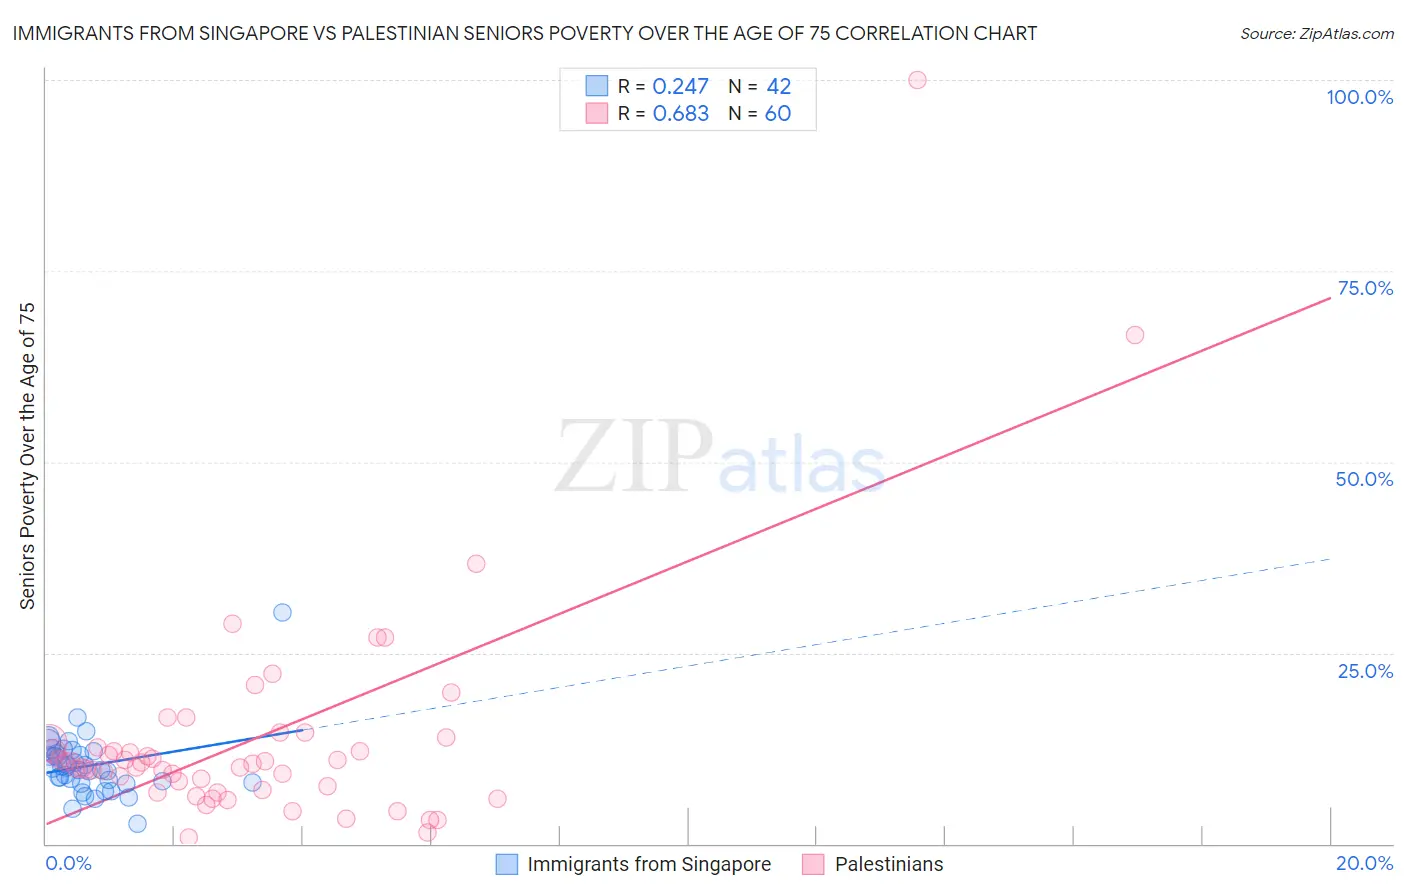 Immigrants from Singapore vs Palestinian Seniors Poverty Over the Age of 75